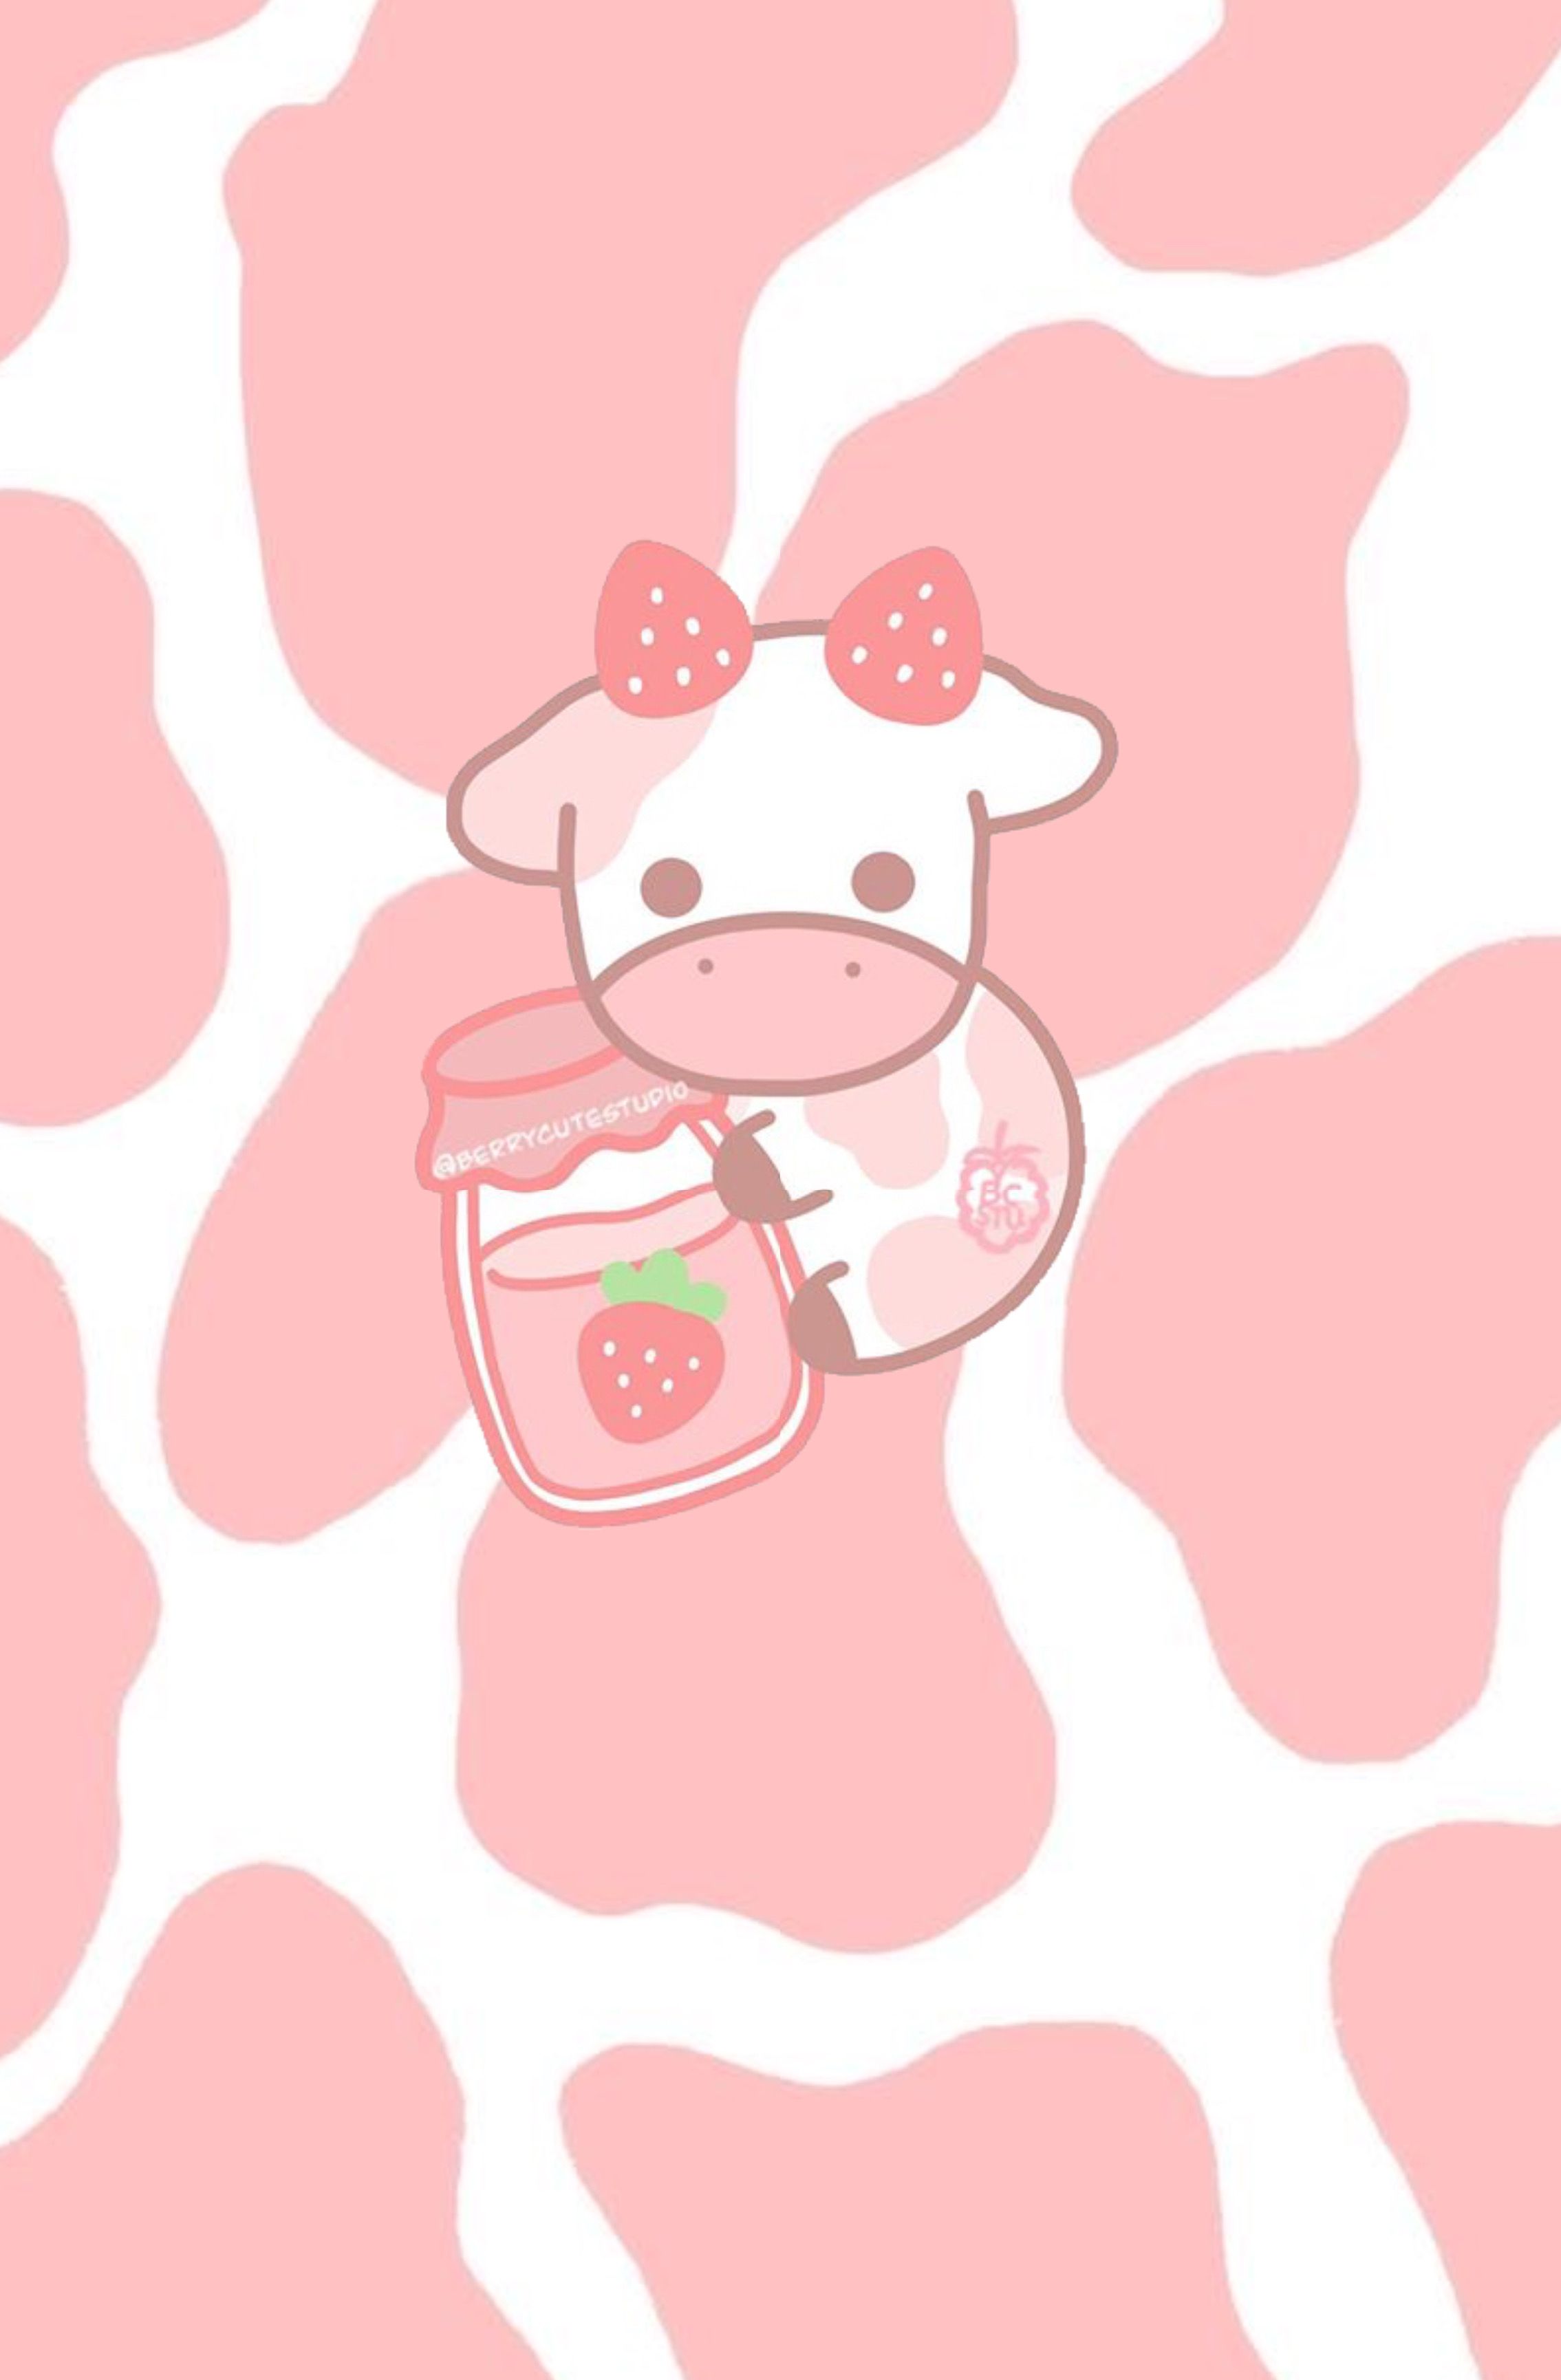 freetoedit#strawberrymilk #cow #strawberry cow #pink #aesthetic #remixed. Cow print wallpaper, Pink wallpaper kawaii, Wallpaper pink cute